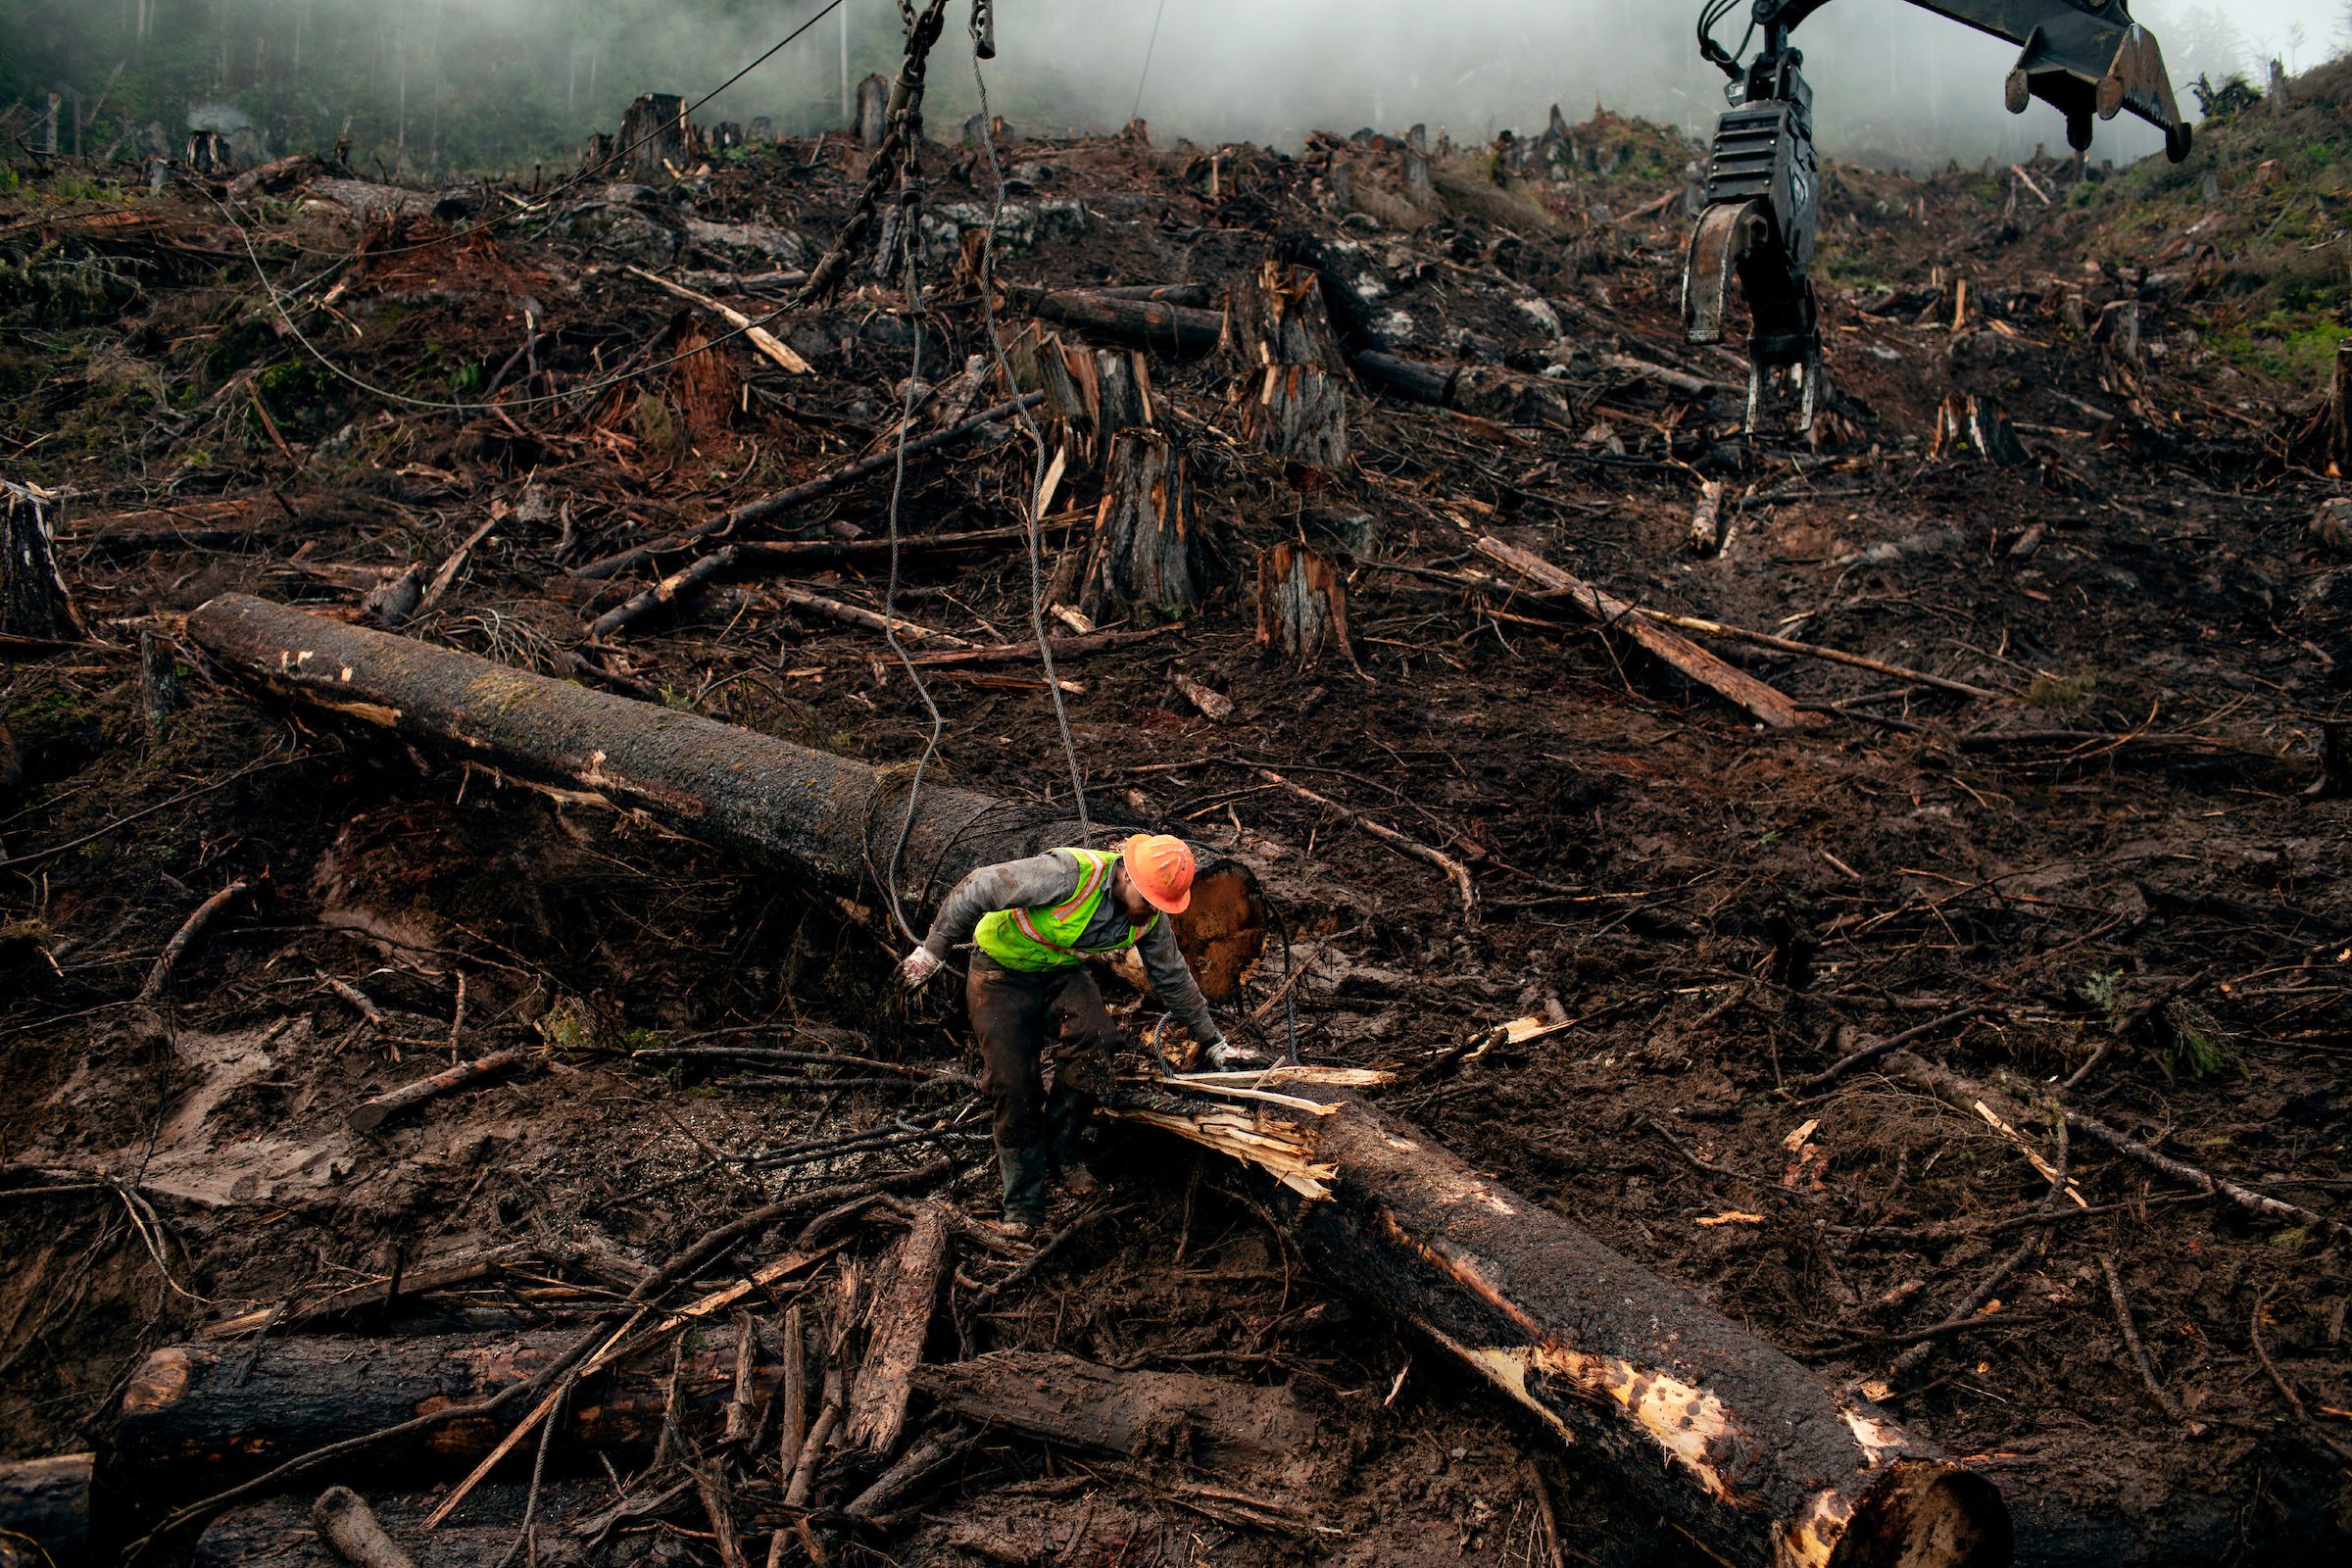 "Choker" crews use heavy machinery to drag logs lashed to hooks from areas of the Tuxekan logging site on Prince of Wales Island. Image by Joshua Cogan. United States, 2019.